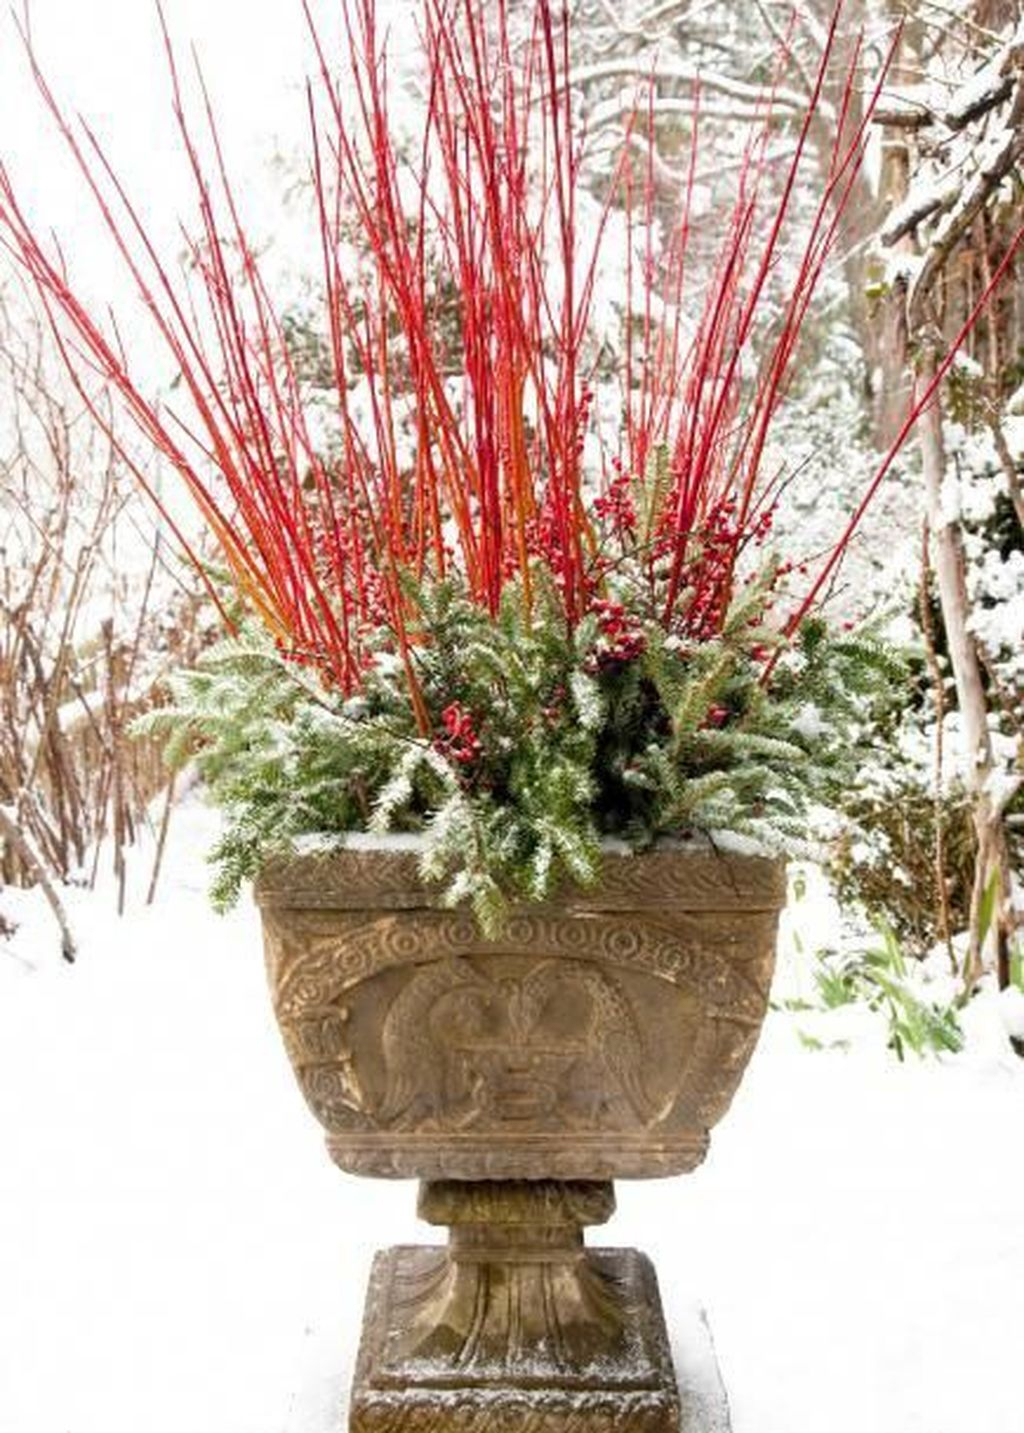 Marvelous Outdoor Holiday Planter Ideas To Beauty Porch Décor 29